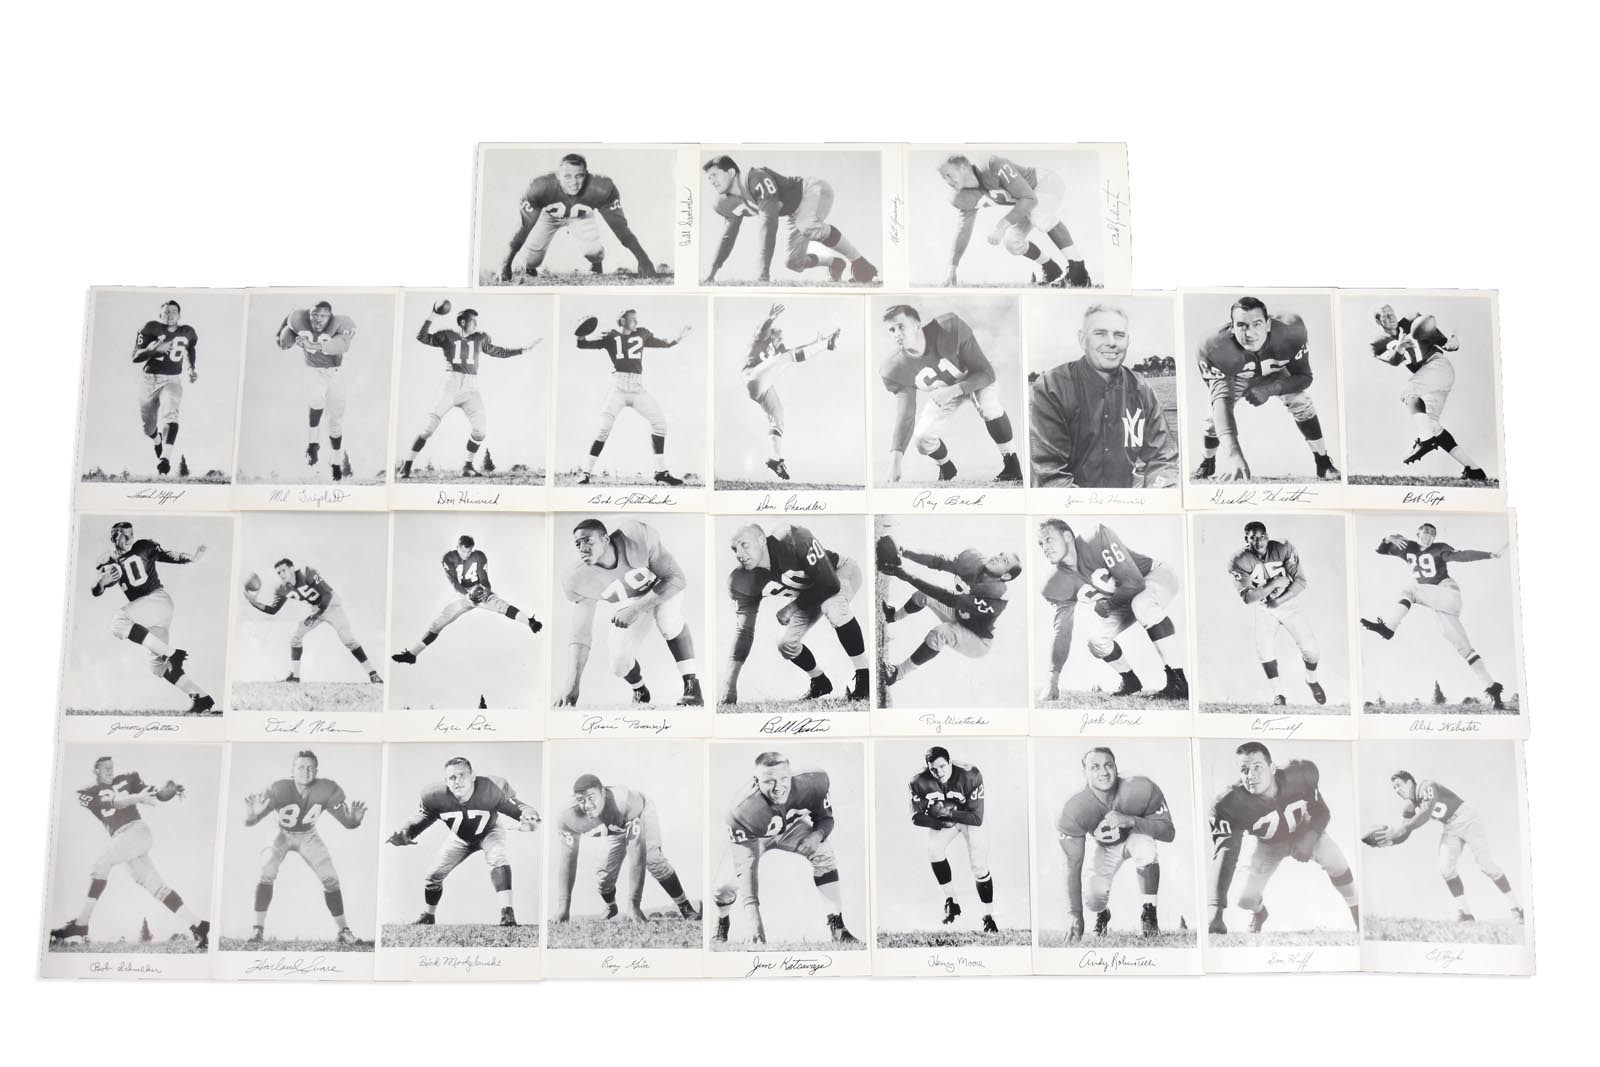 Football - Rare 1956 New York Giants Football Picture Pack (Ken MacAfee Collection)